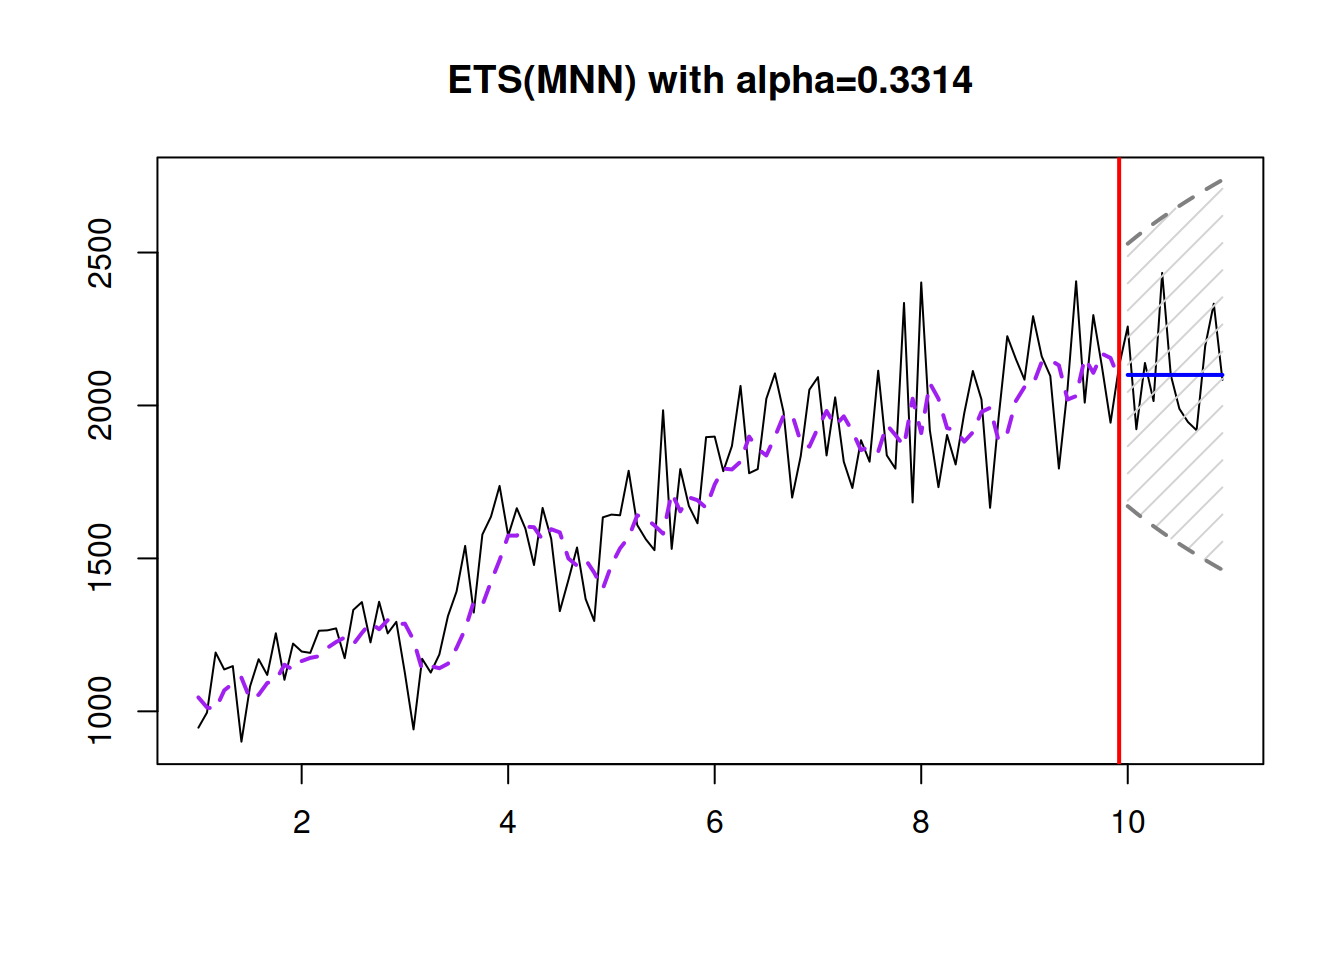 ETS(M,N,N) model applied to the data generated from the same model.